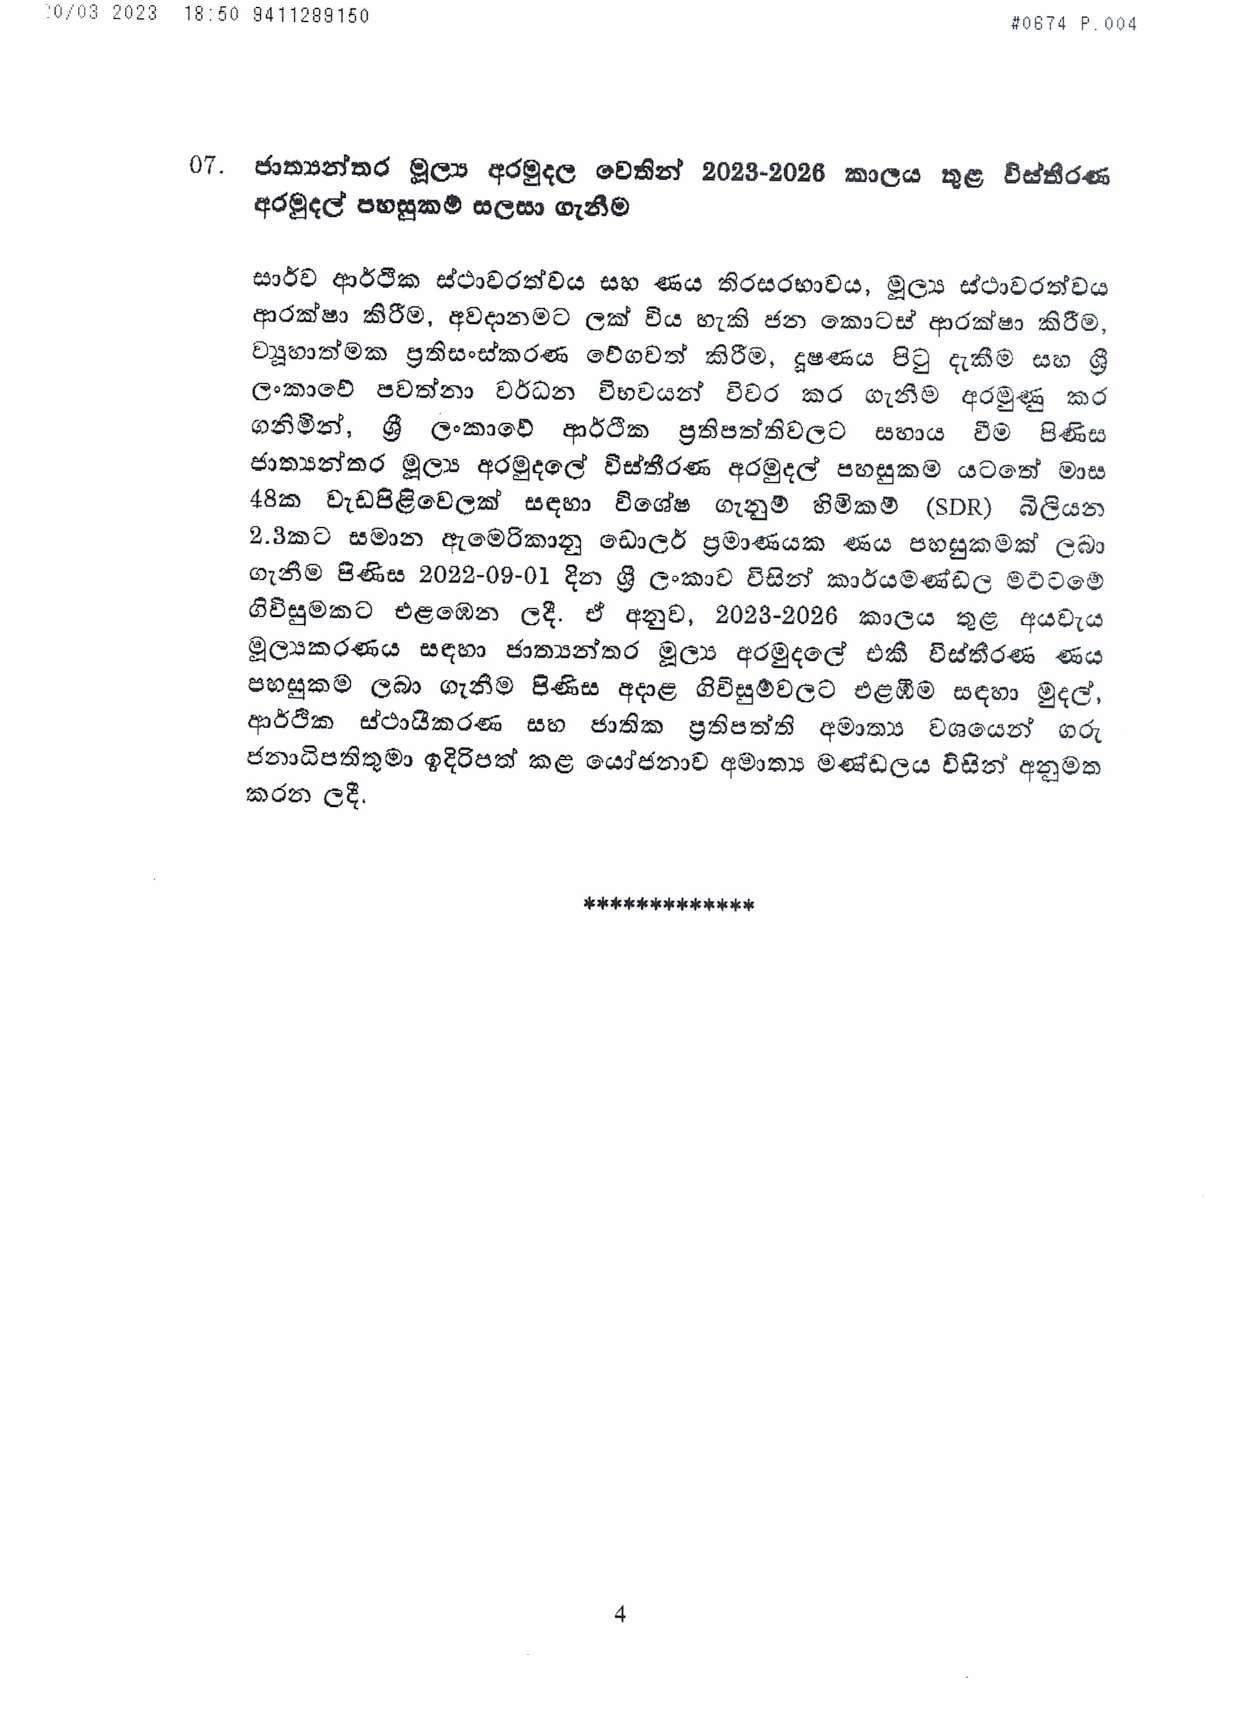 Cabinet Decision on 20.03.2023 page 004